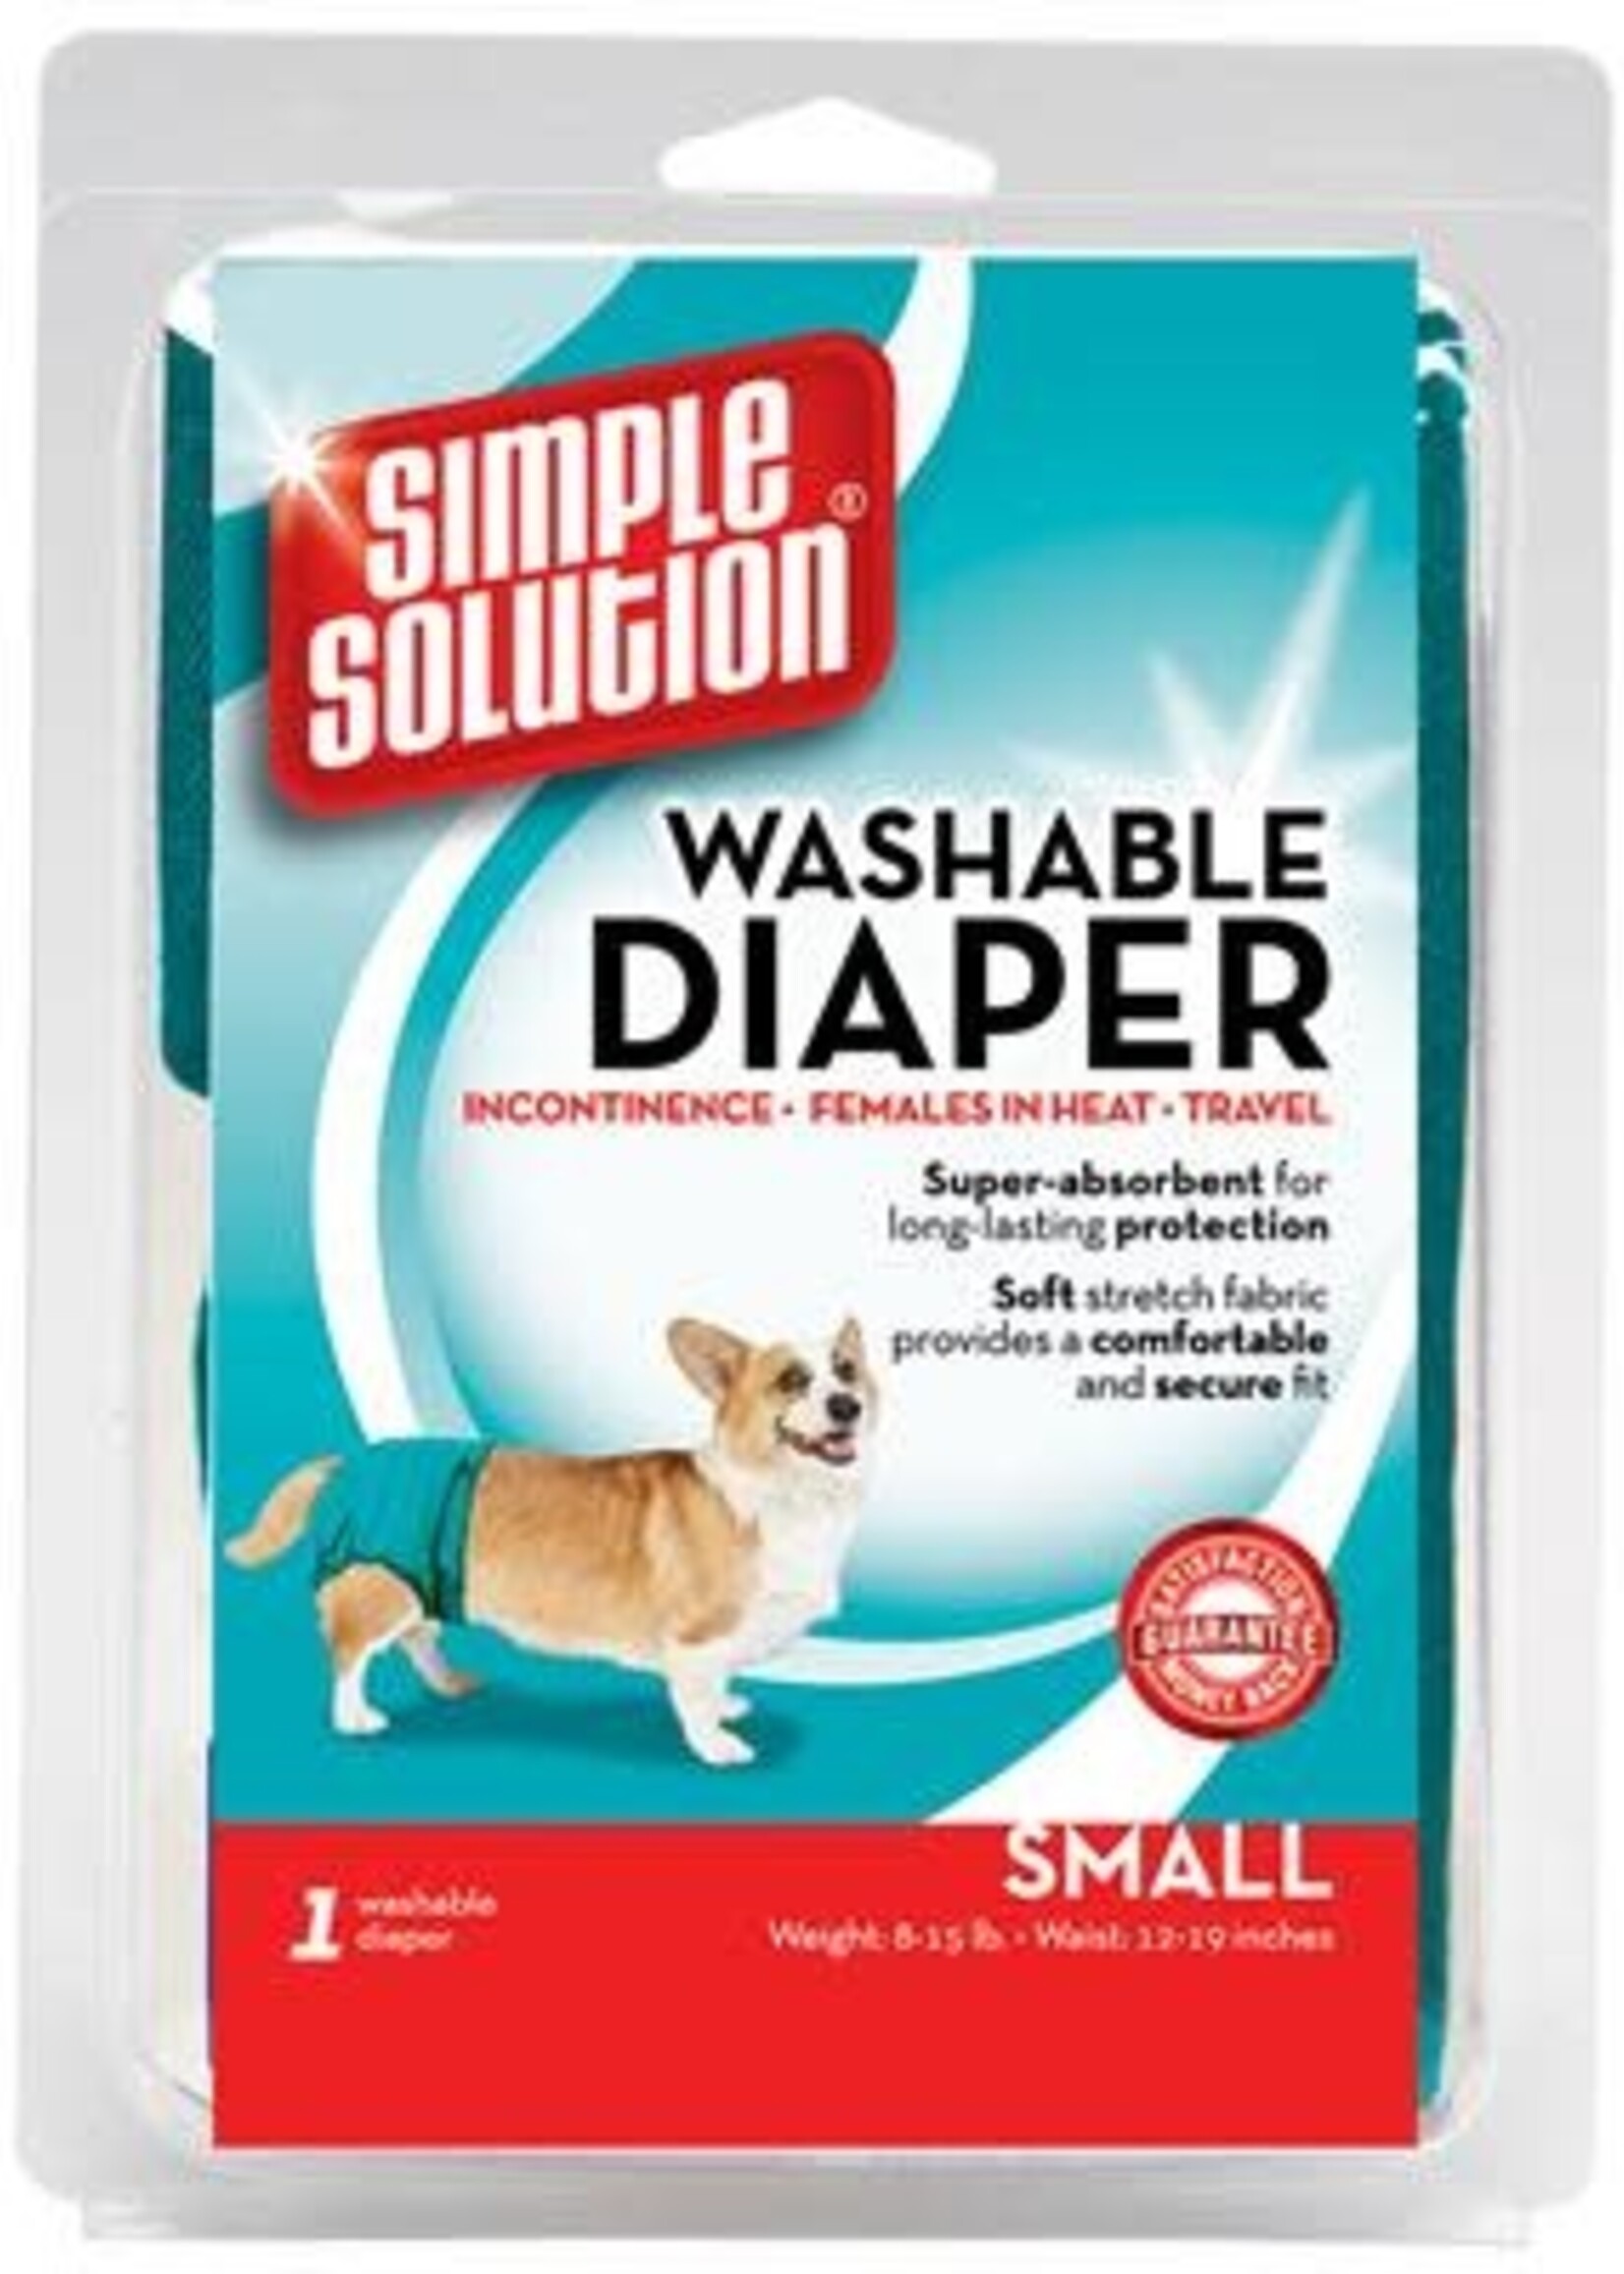 Simple Solutions Washable Female Diaper Small